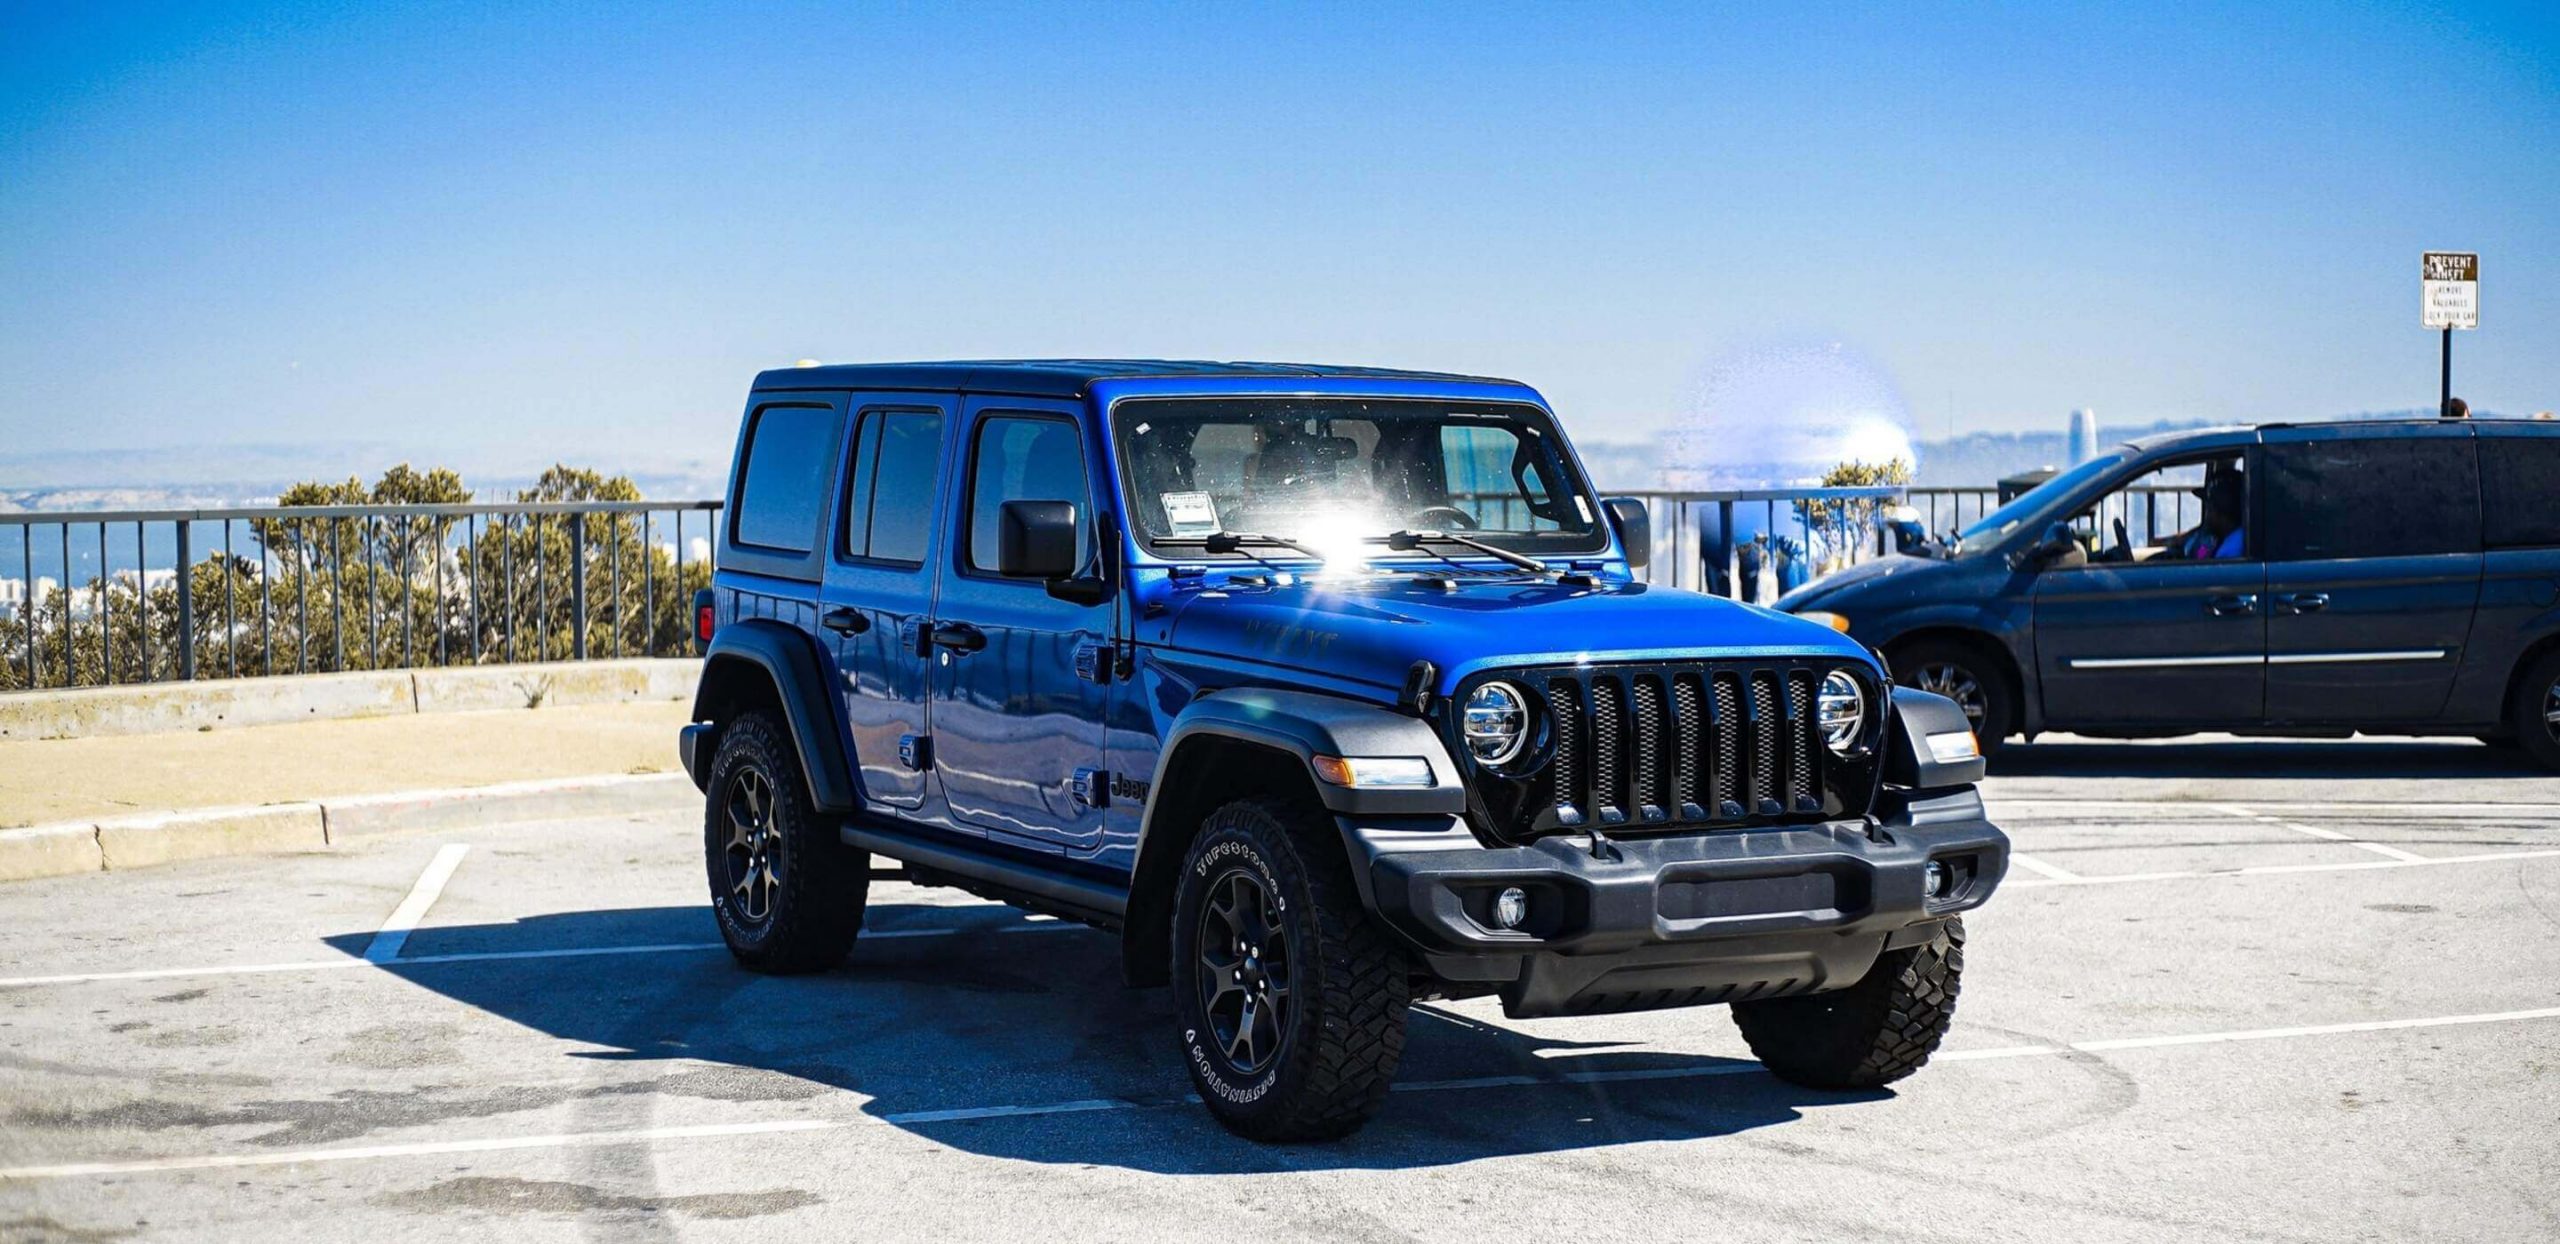 2020-jeep-wrangler-unlimited-blue-featured-image